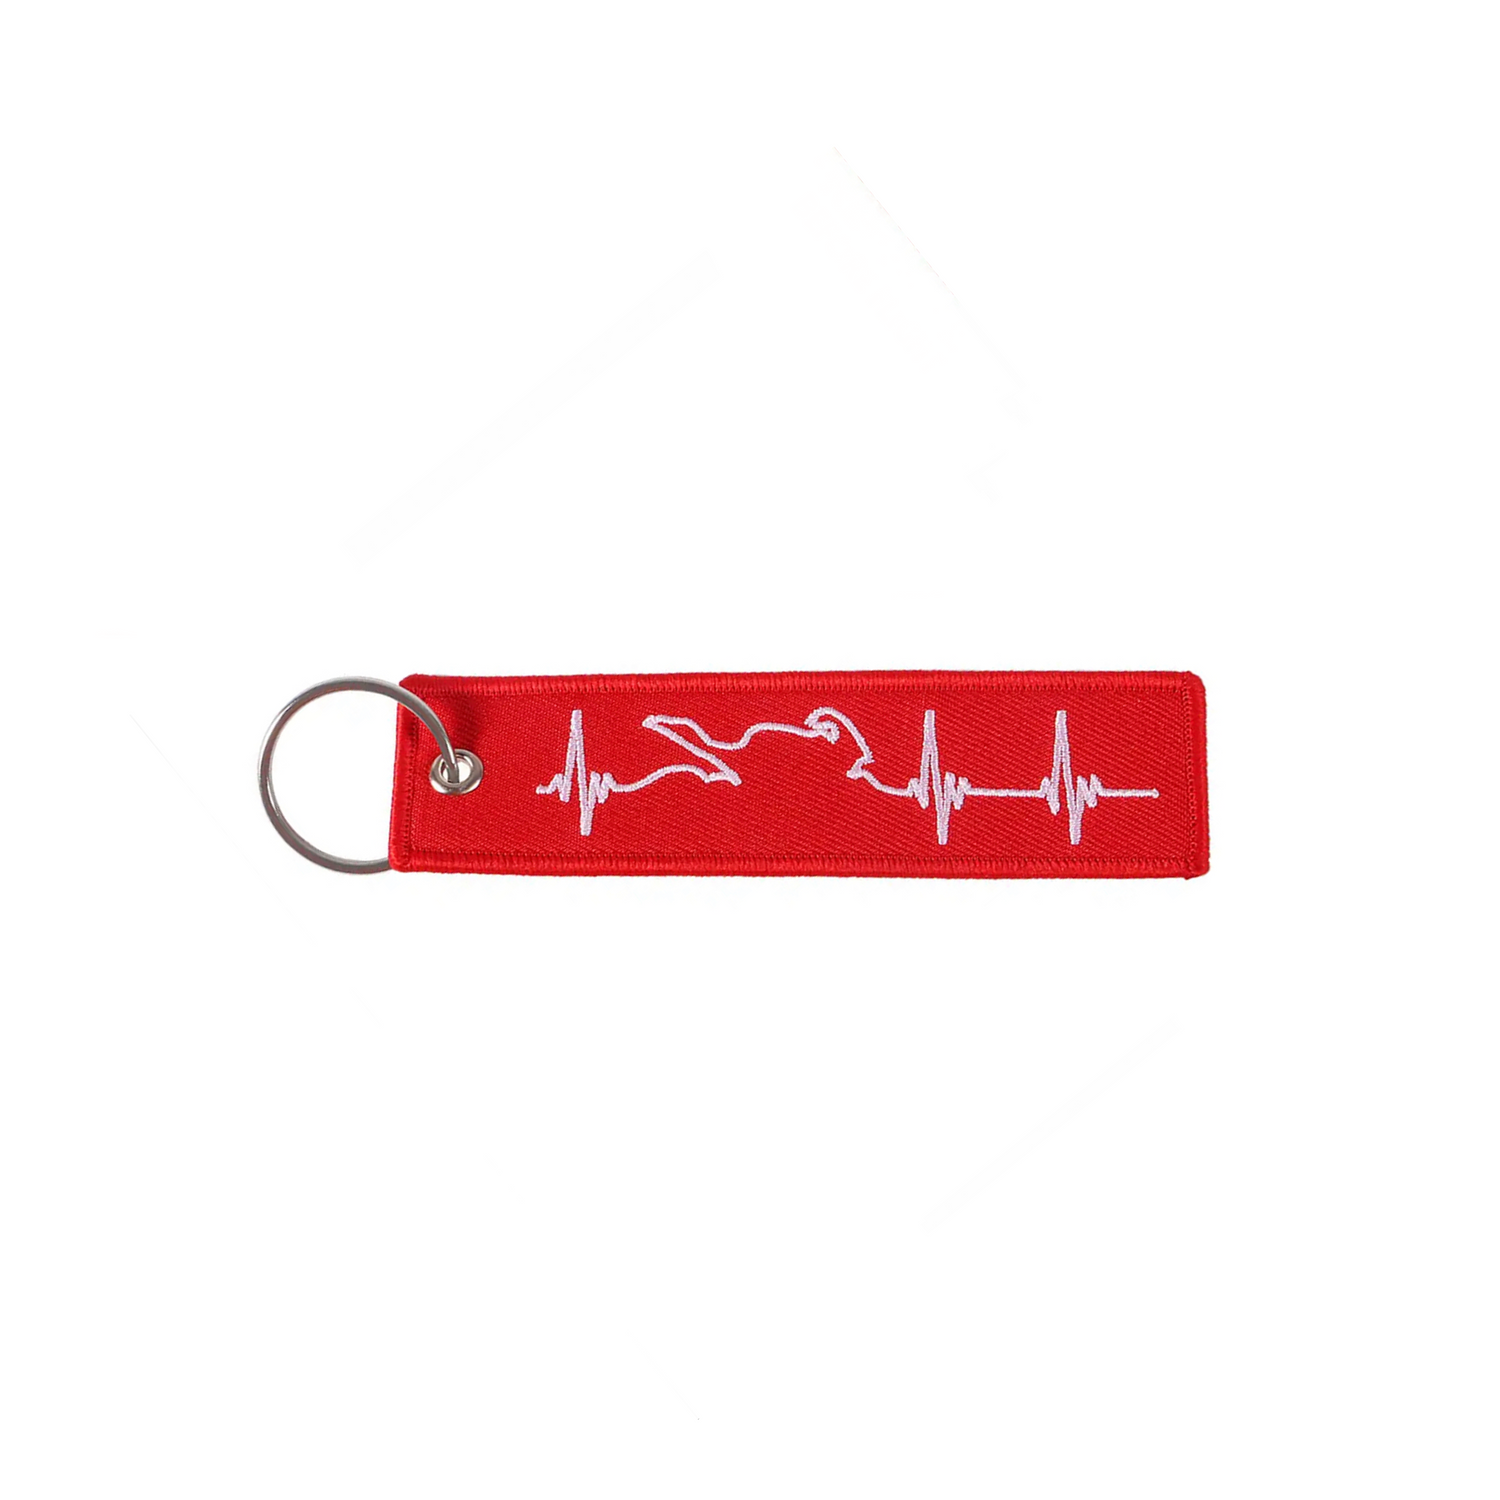 Motorcycle Keychain - Heartbeat Red